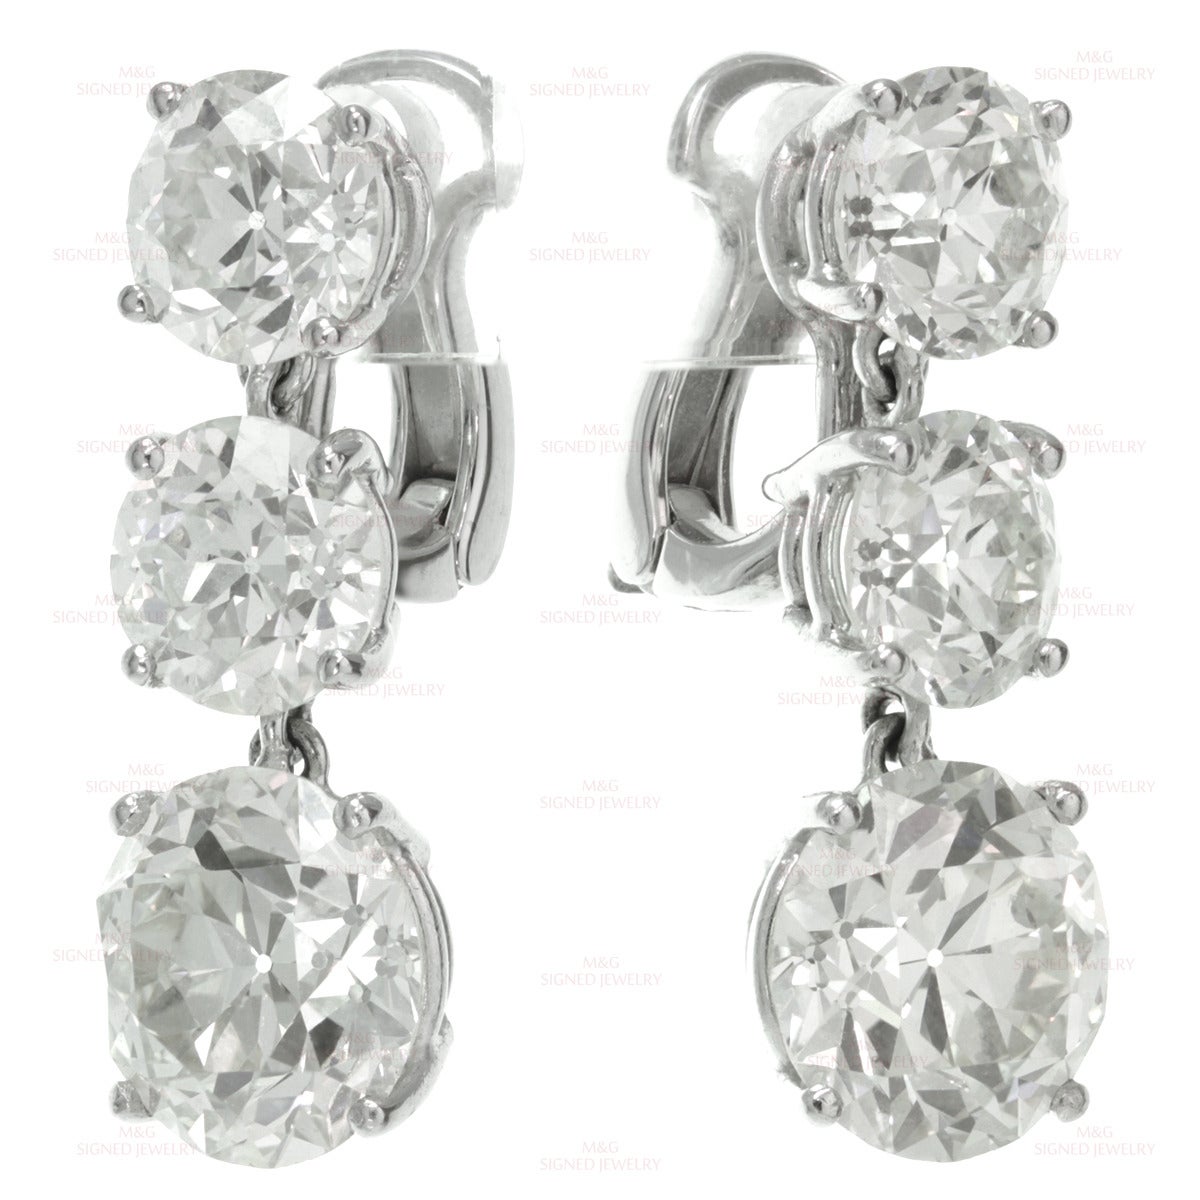 These magnificent dangling drop earrings are crafted in platinum and completed with newer 18k white gold clasps. The earrings are set with four 6.99mm to 7.23mm diamonds (3 diamonds of 1.45 carats, 1 diamond of 1.40 carats) and two 9.51mm to 9.69mm